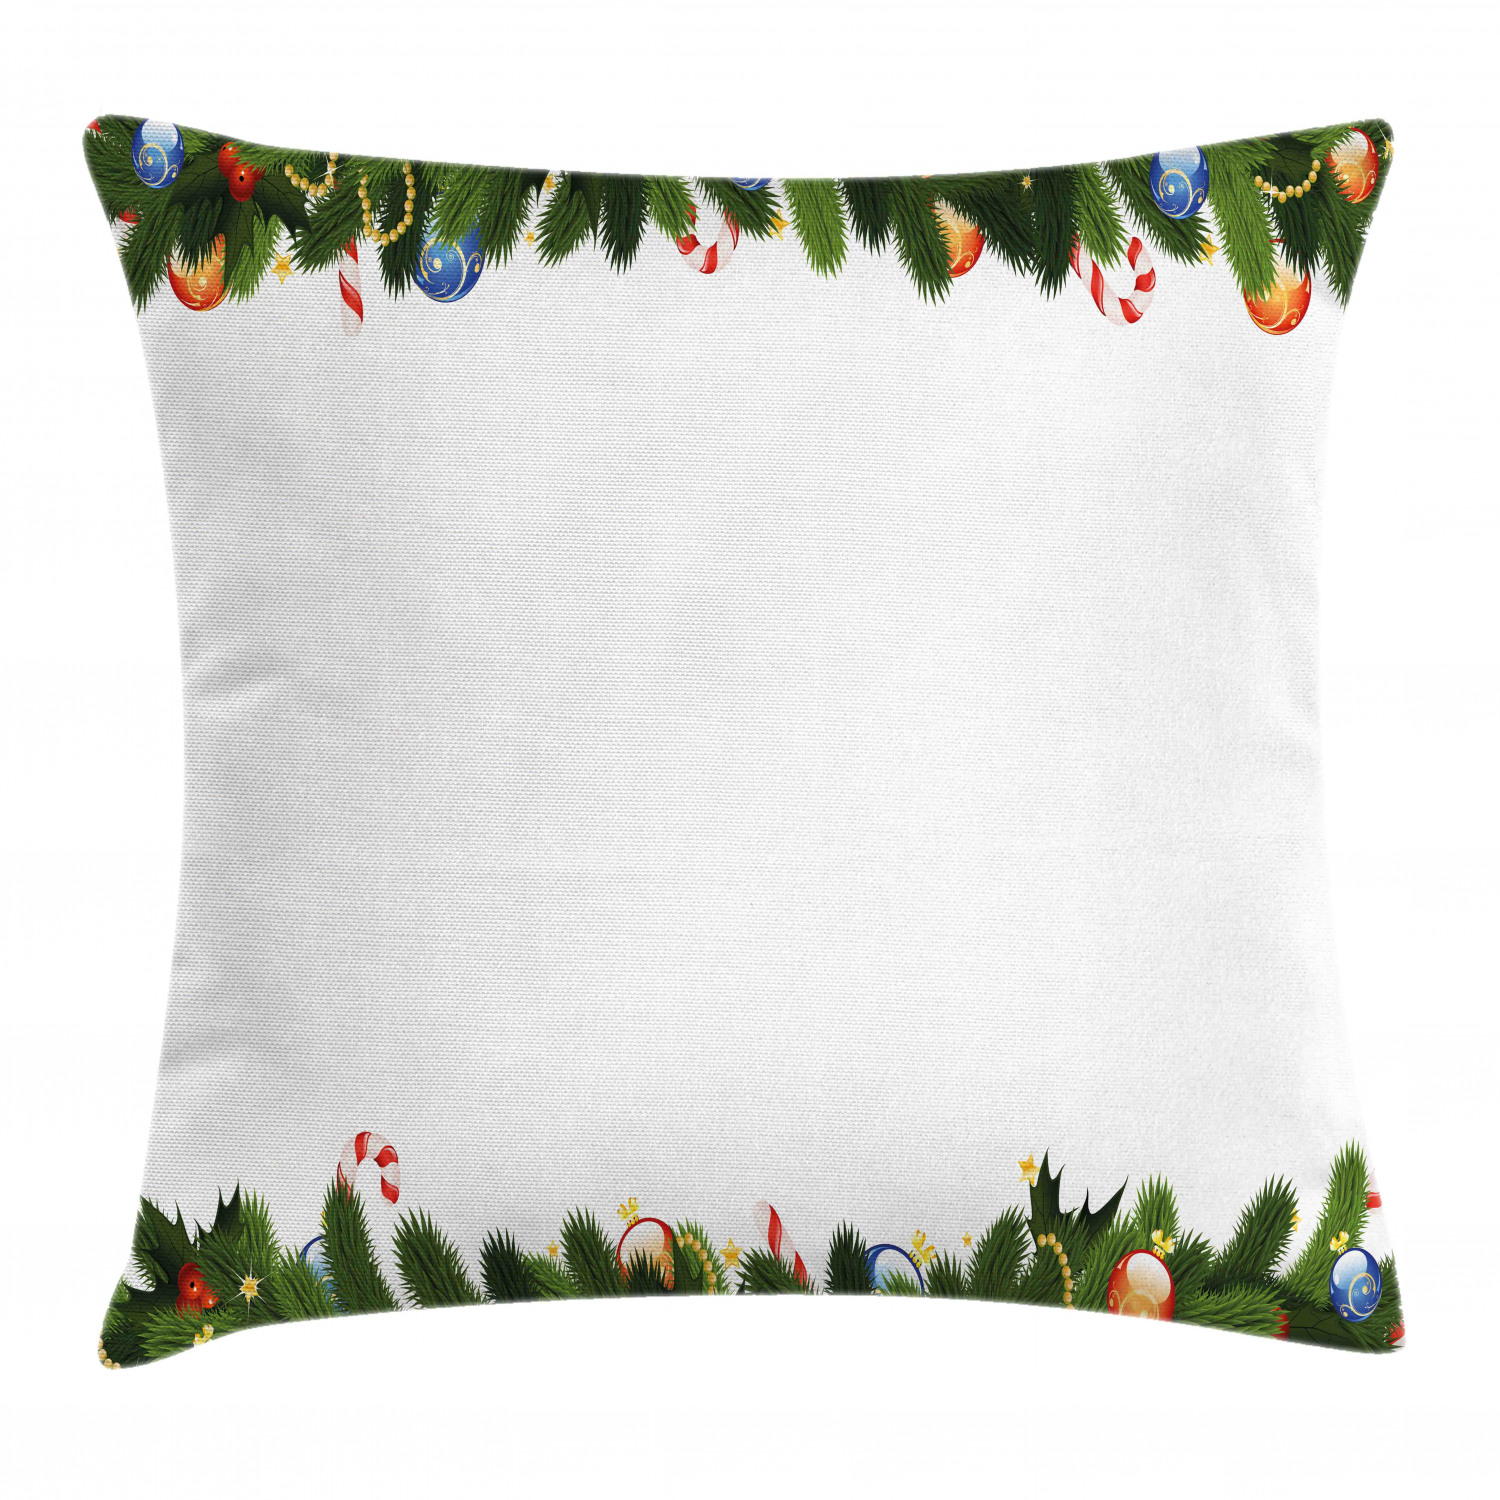 Ambesonne 16" x 16" Multi-color Polyester Decorative Pillow Cover - image 1 of 2